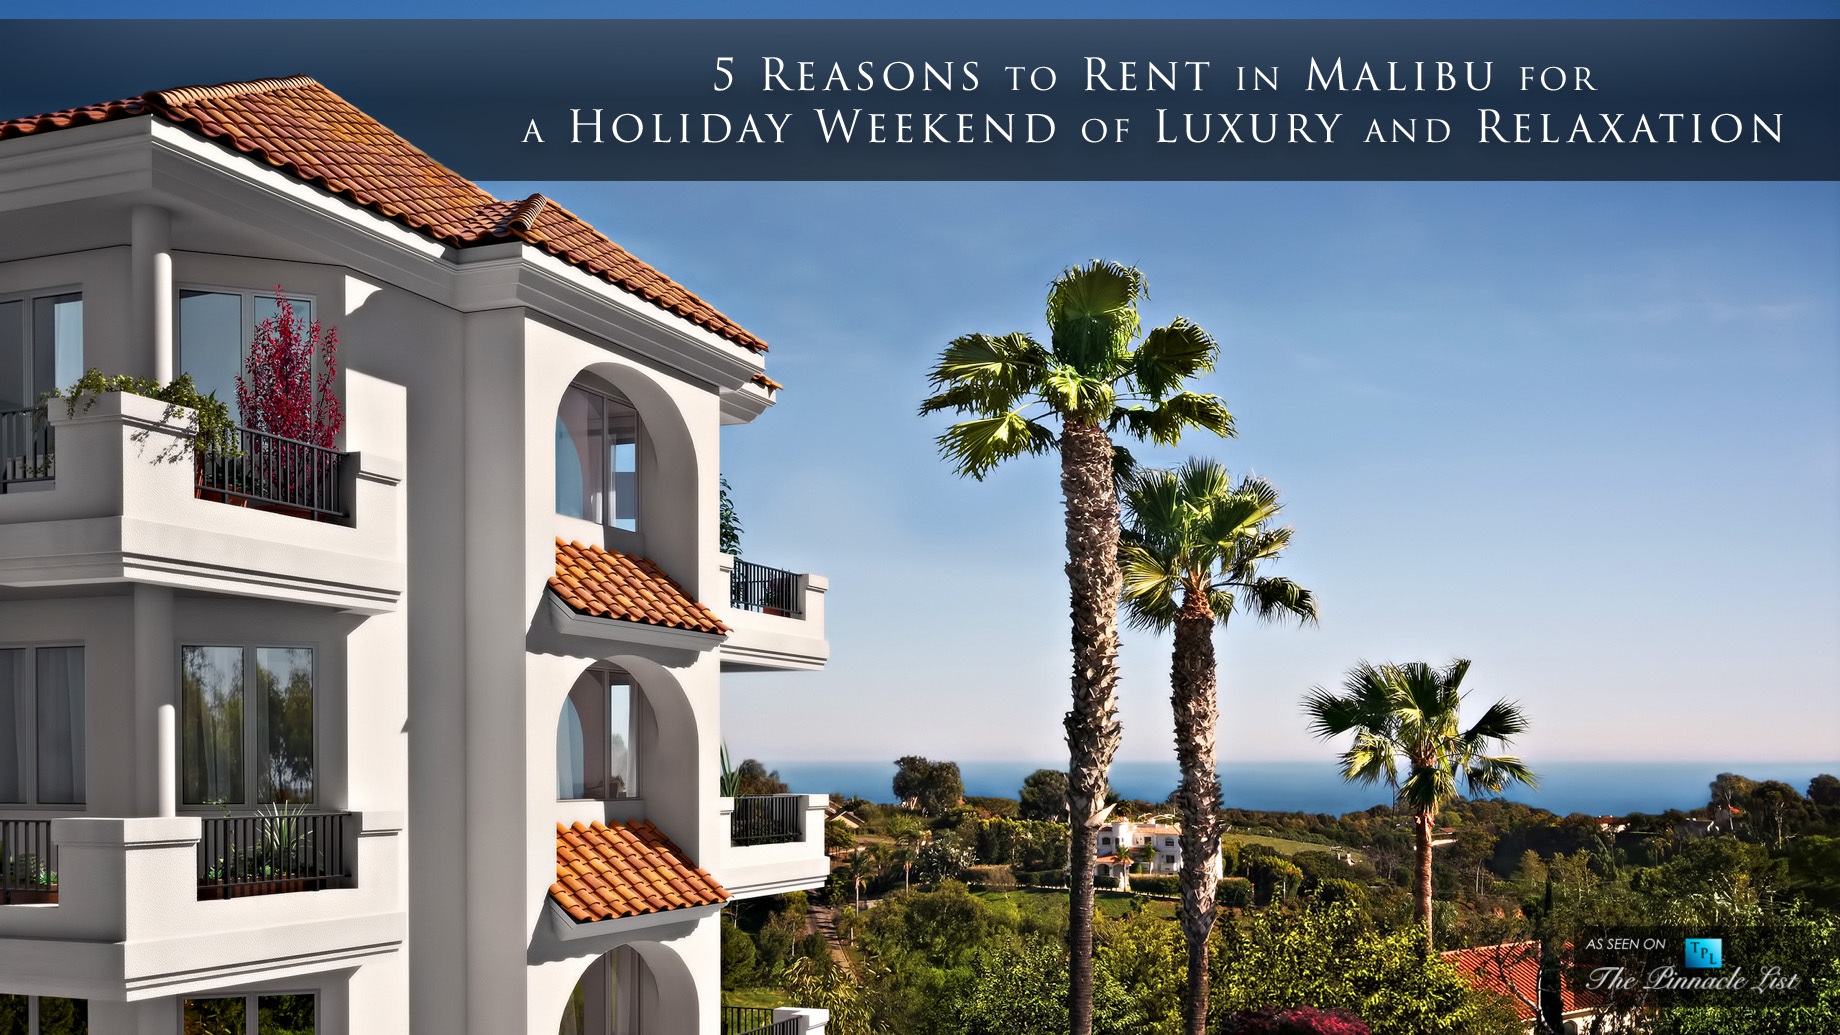 5 Reasons to Rent in Malibu for a Holiday Weekend of Luxury and Relaxation